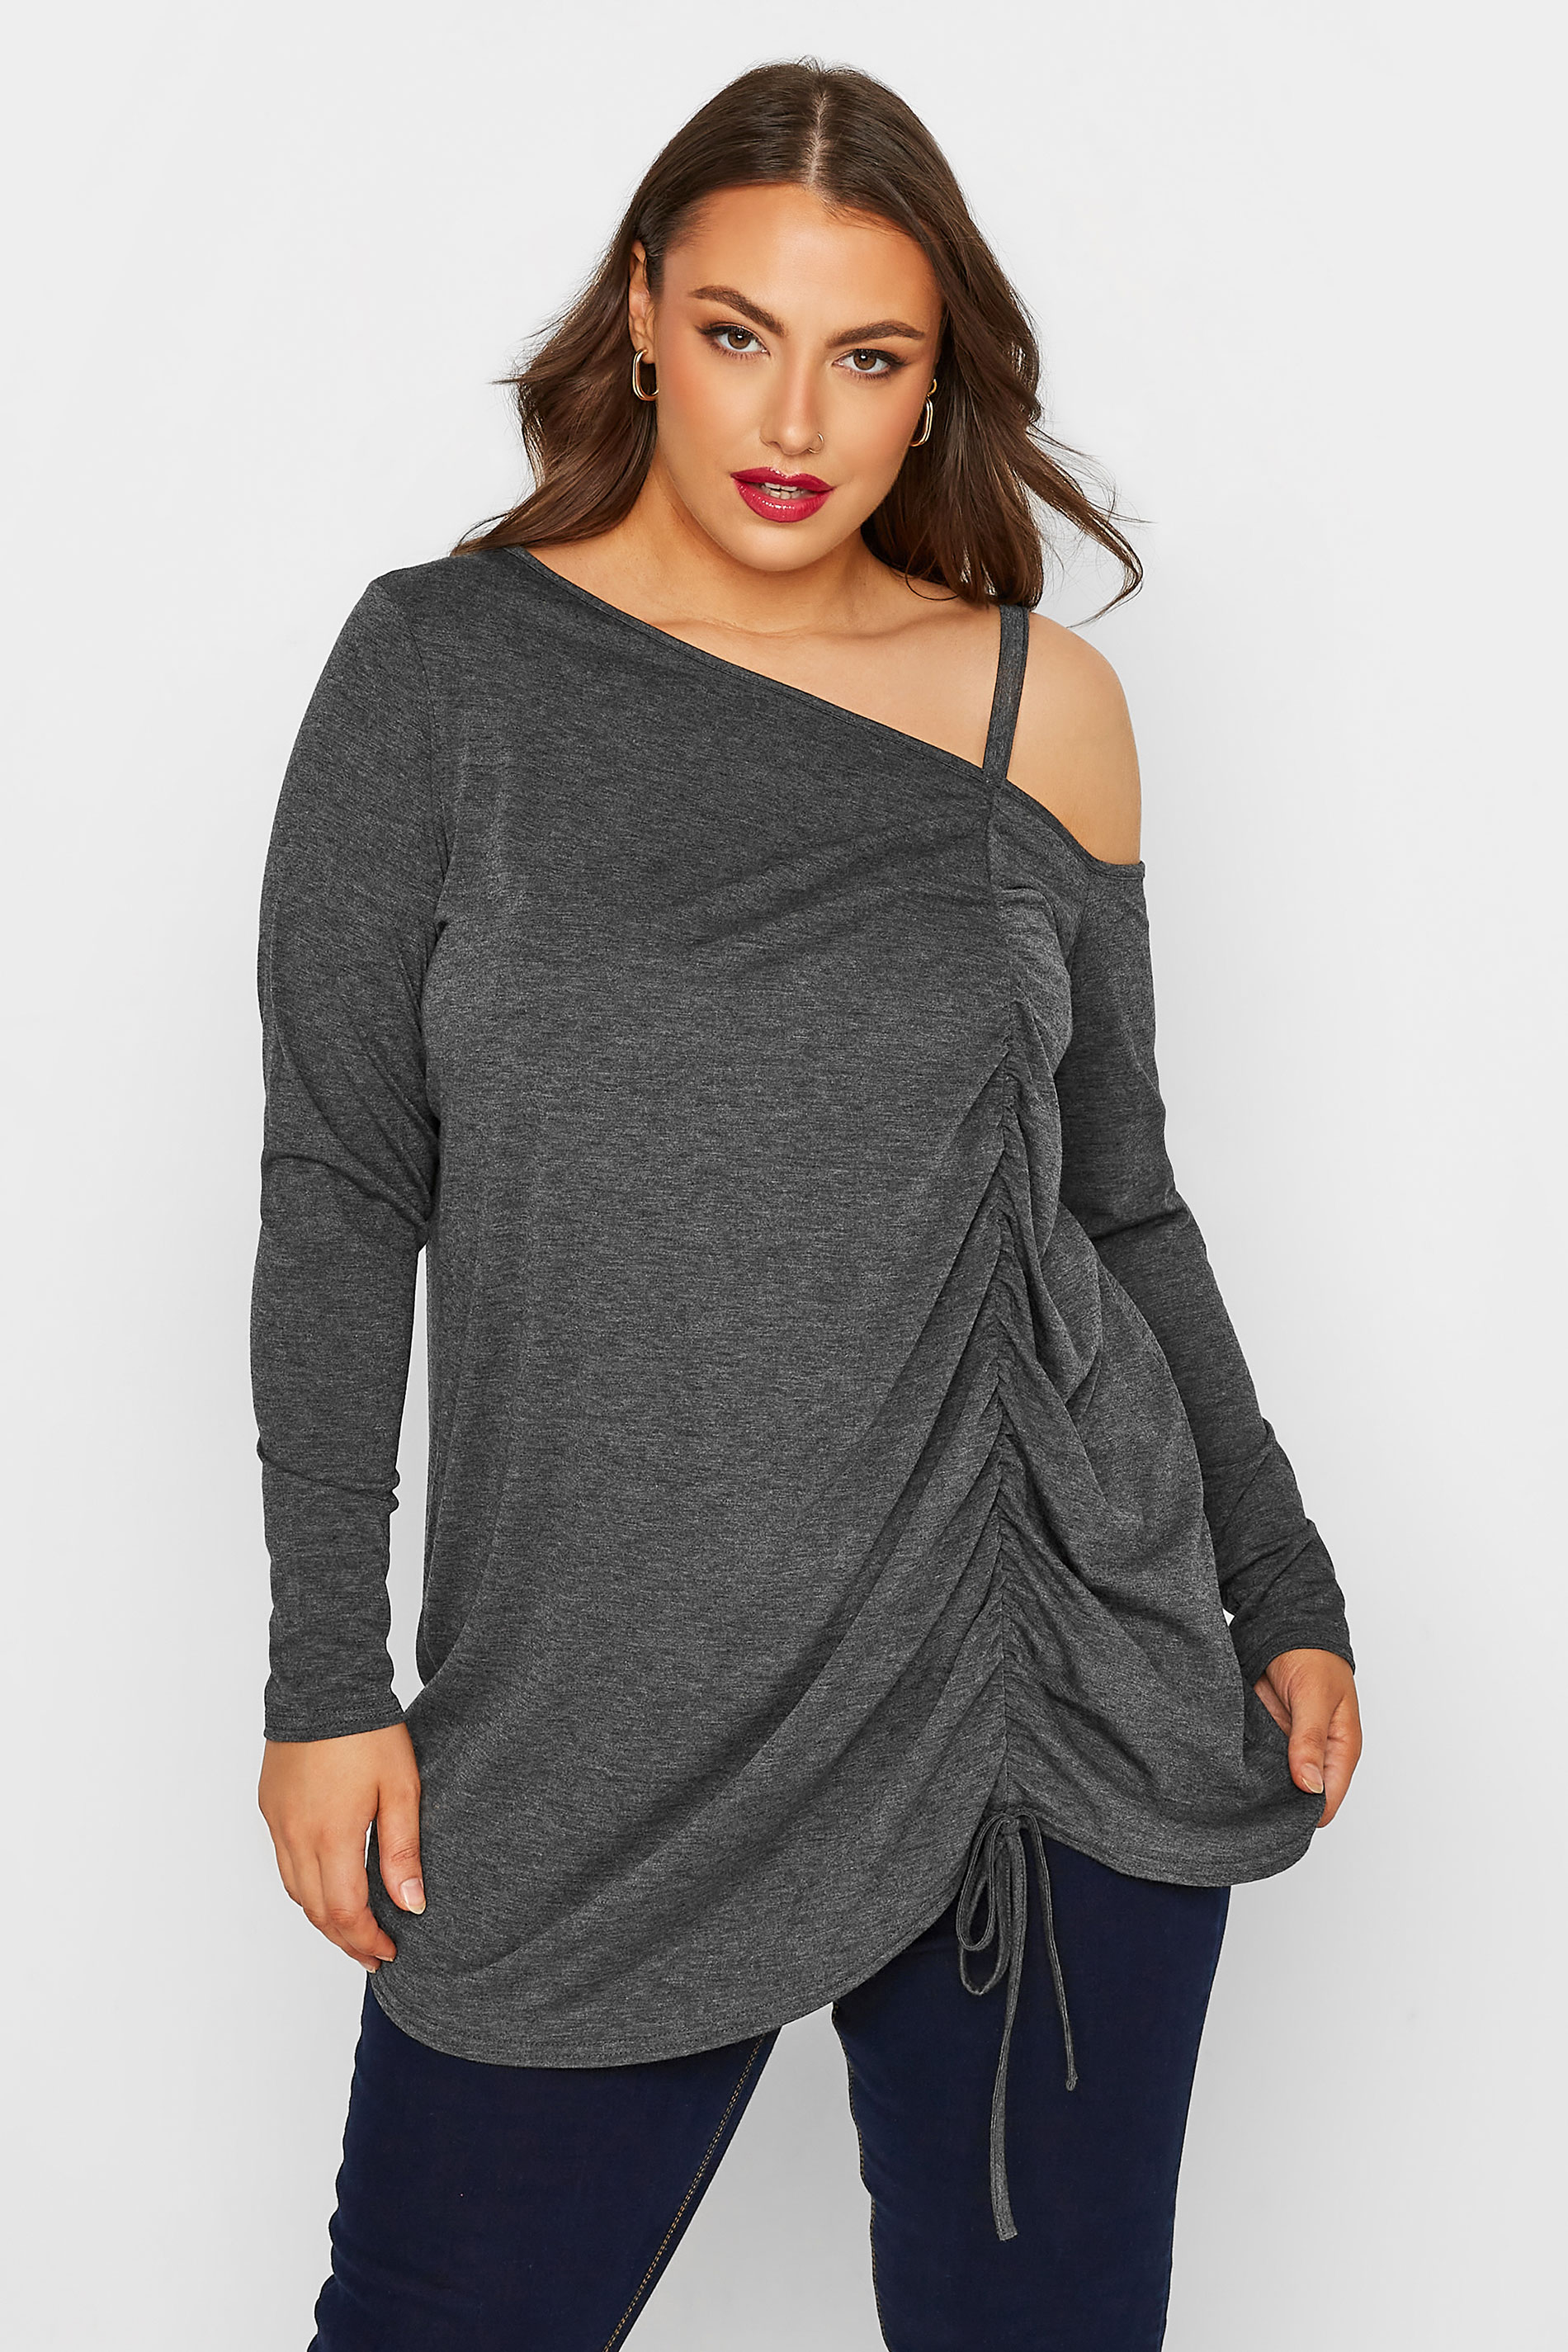 LIMITED COLLECTION Plus Size Charcoal Grey Ruched One Shoulder Top | Yours Clothing 1